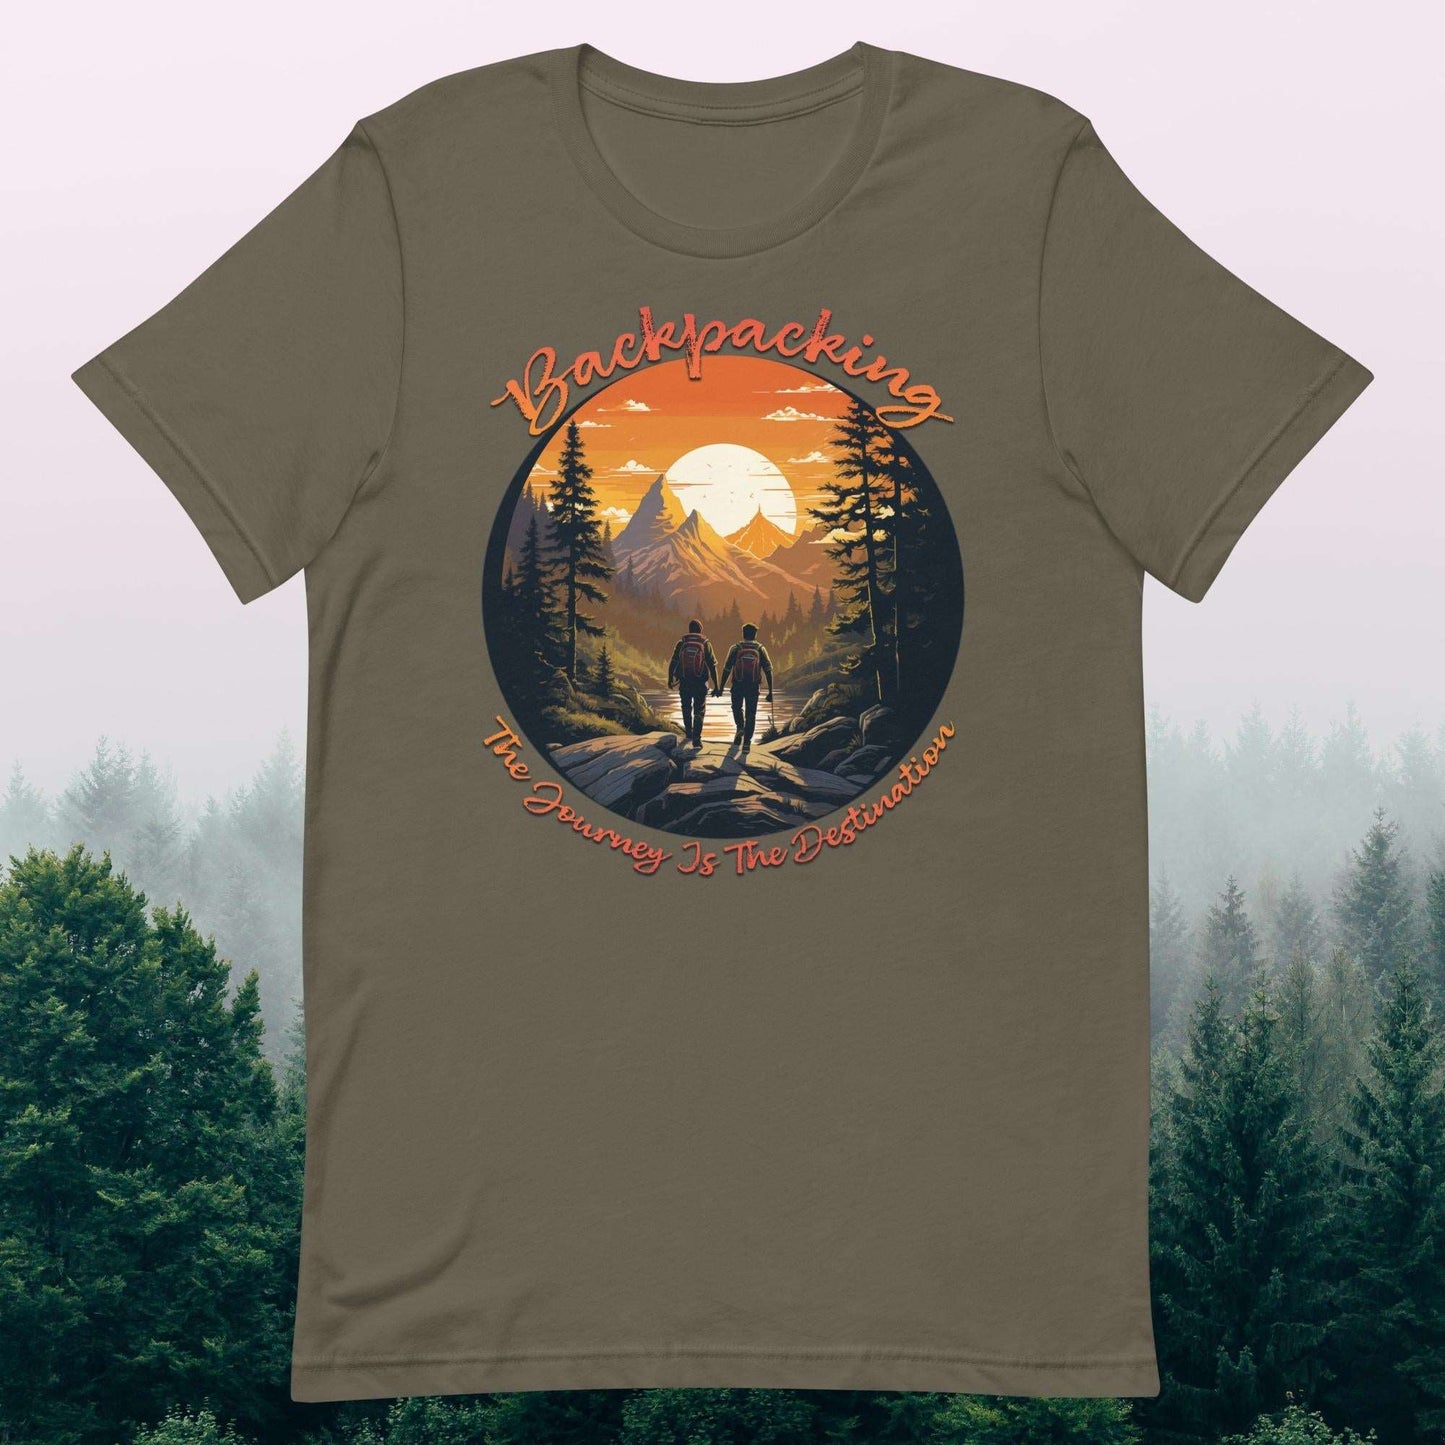 Backpacking: The Journey Is The Destination - The Dude Abides - T-shirt - Backpacking essentials - Camping gear